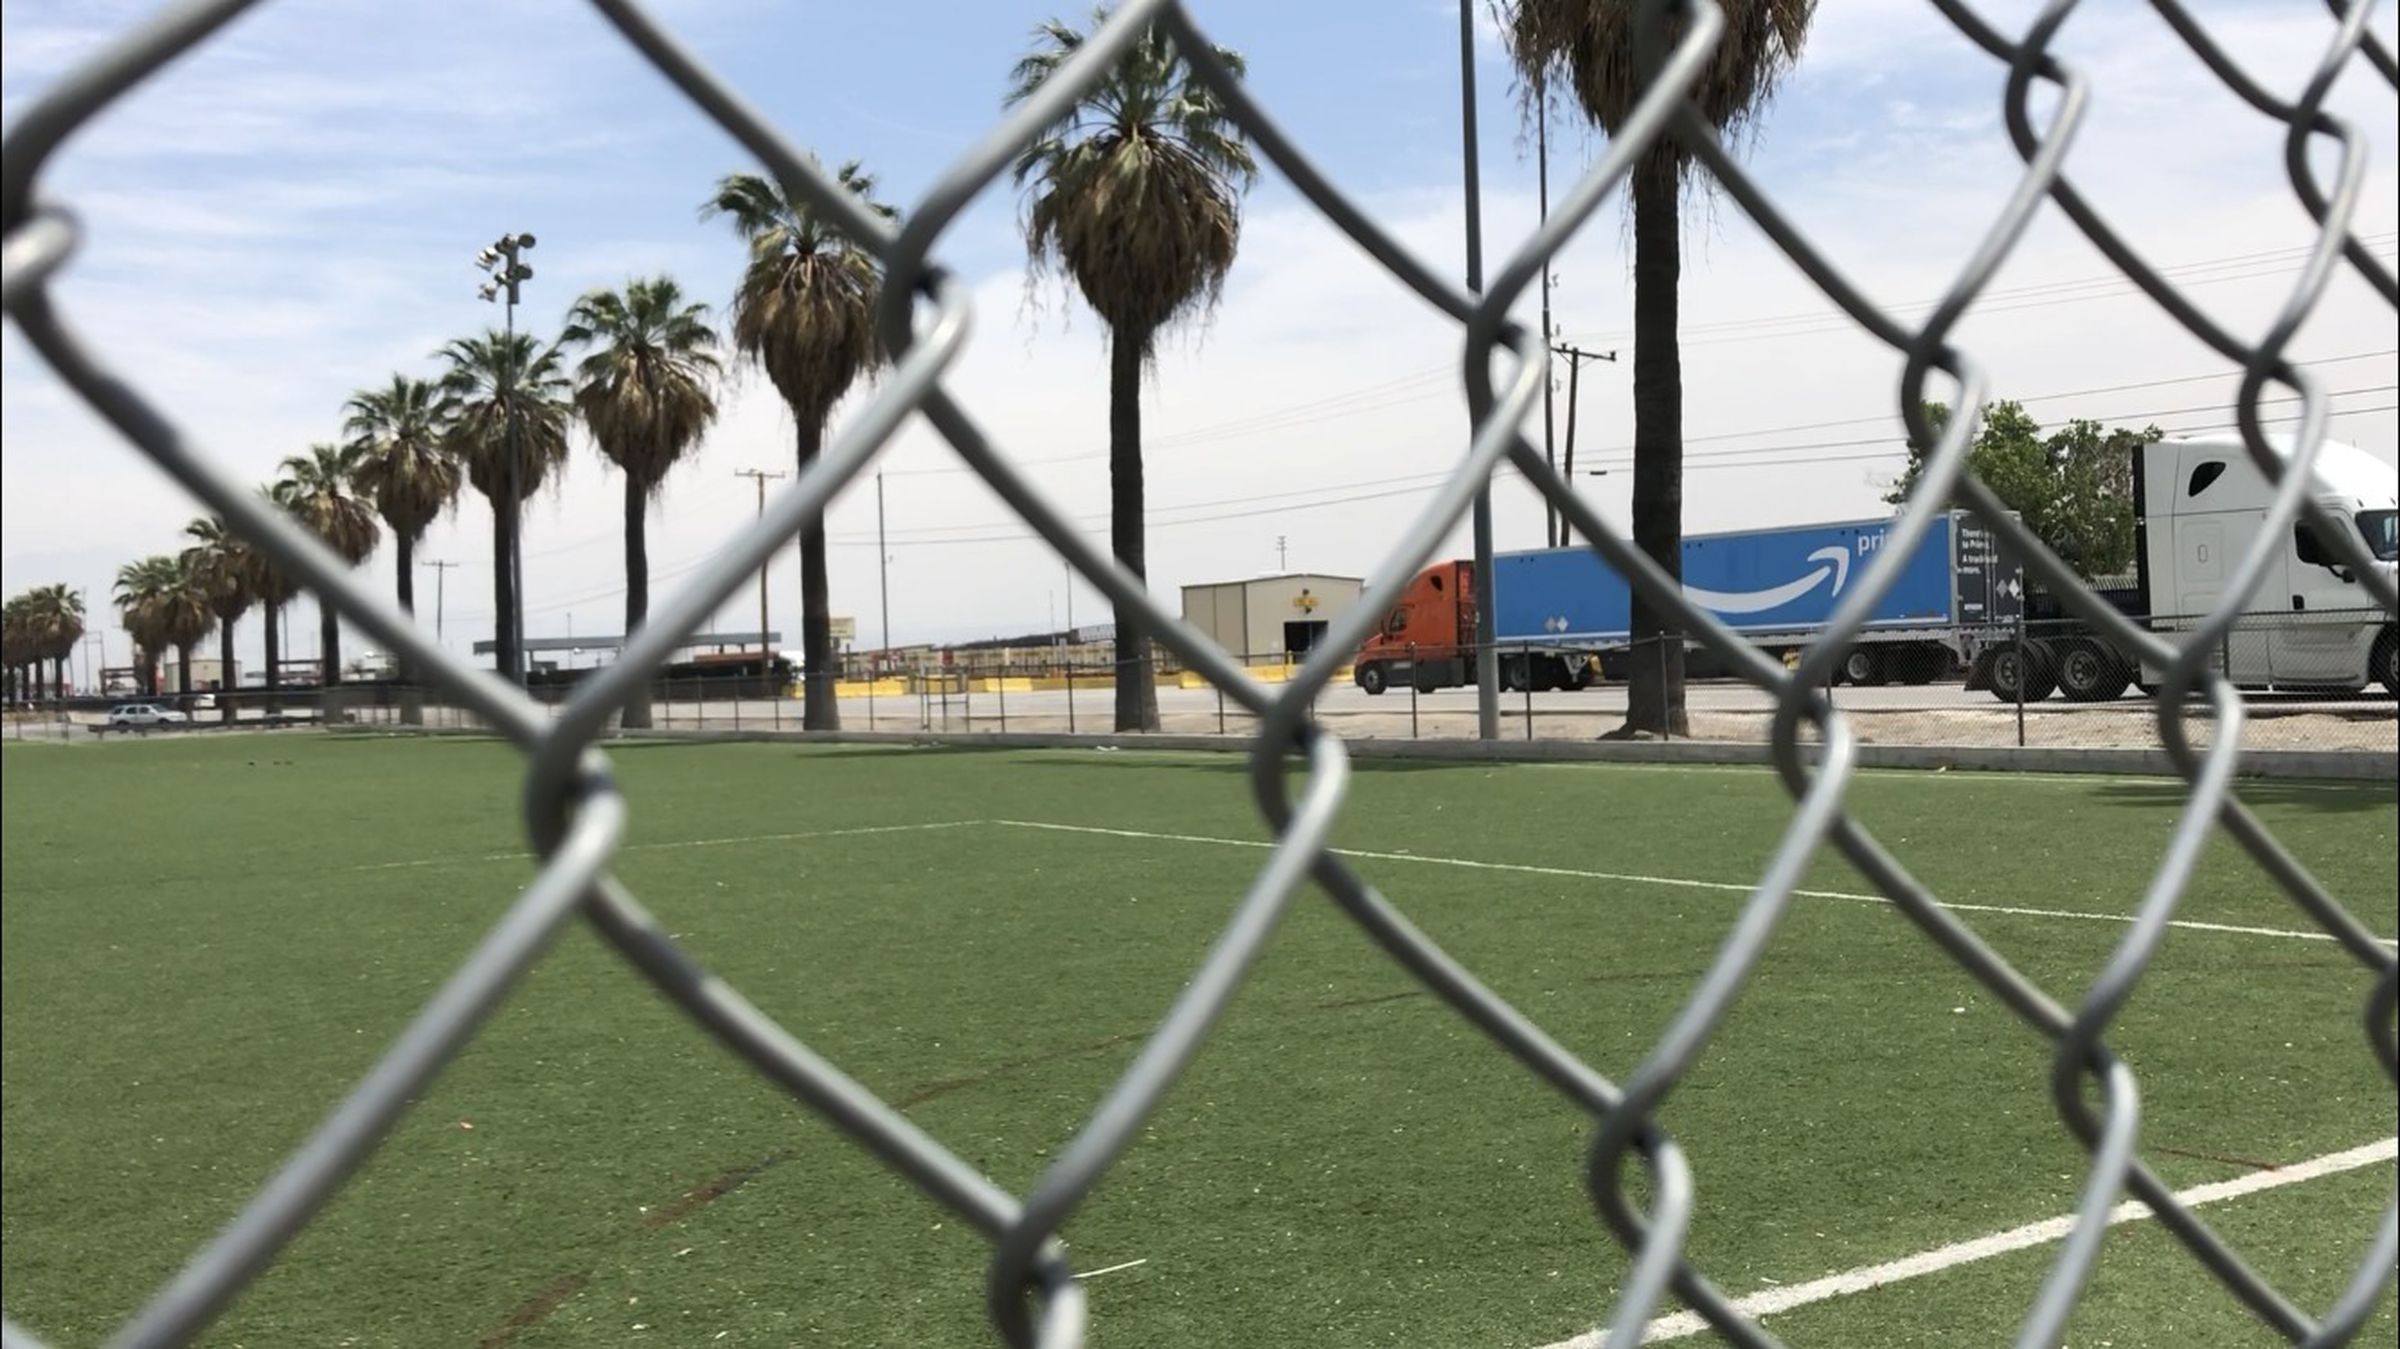 An Amazon Prime truck drives into the BNSF rail yard. The rail yard sits across the street from a soccer field and community center in San Bernardino, California and attracts a steady stream of truck traffic.